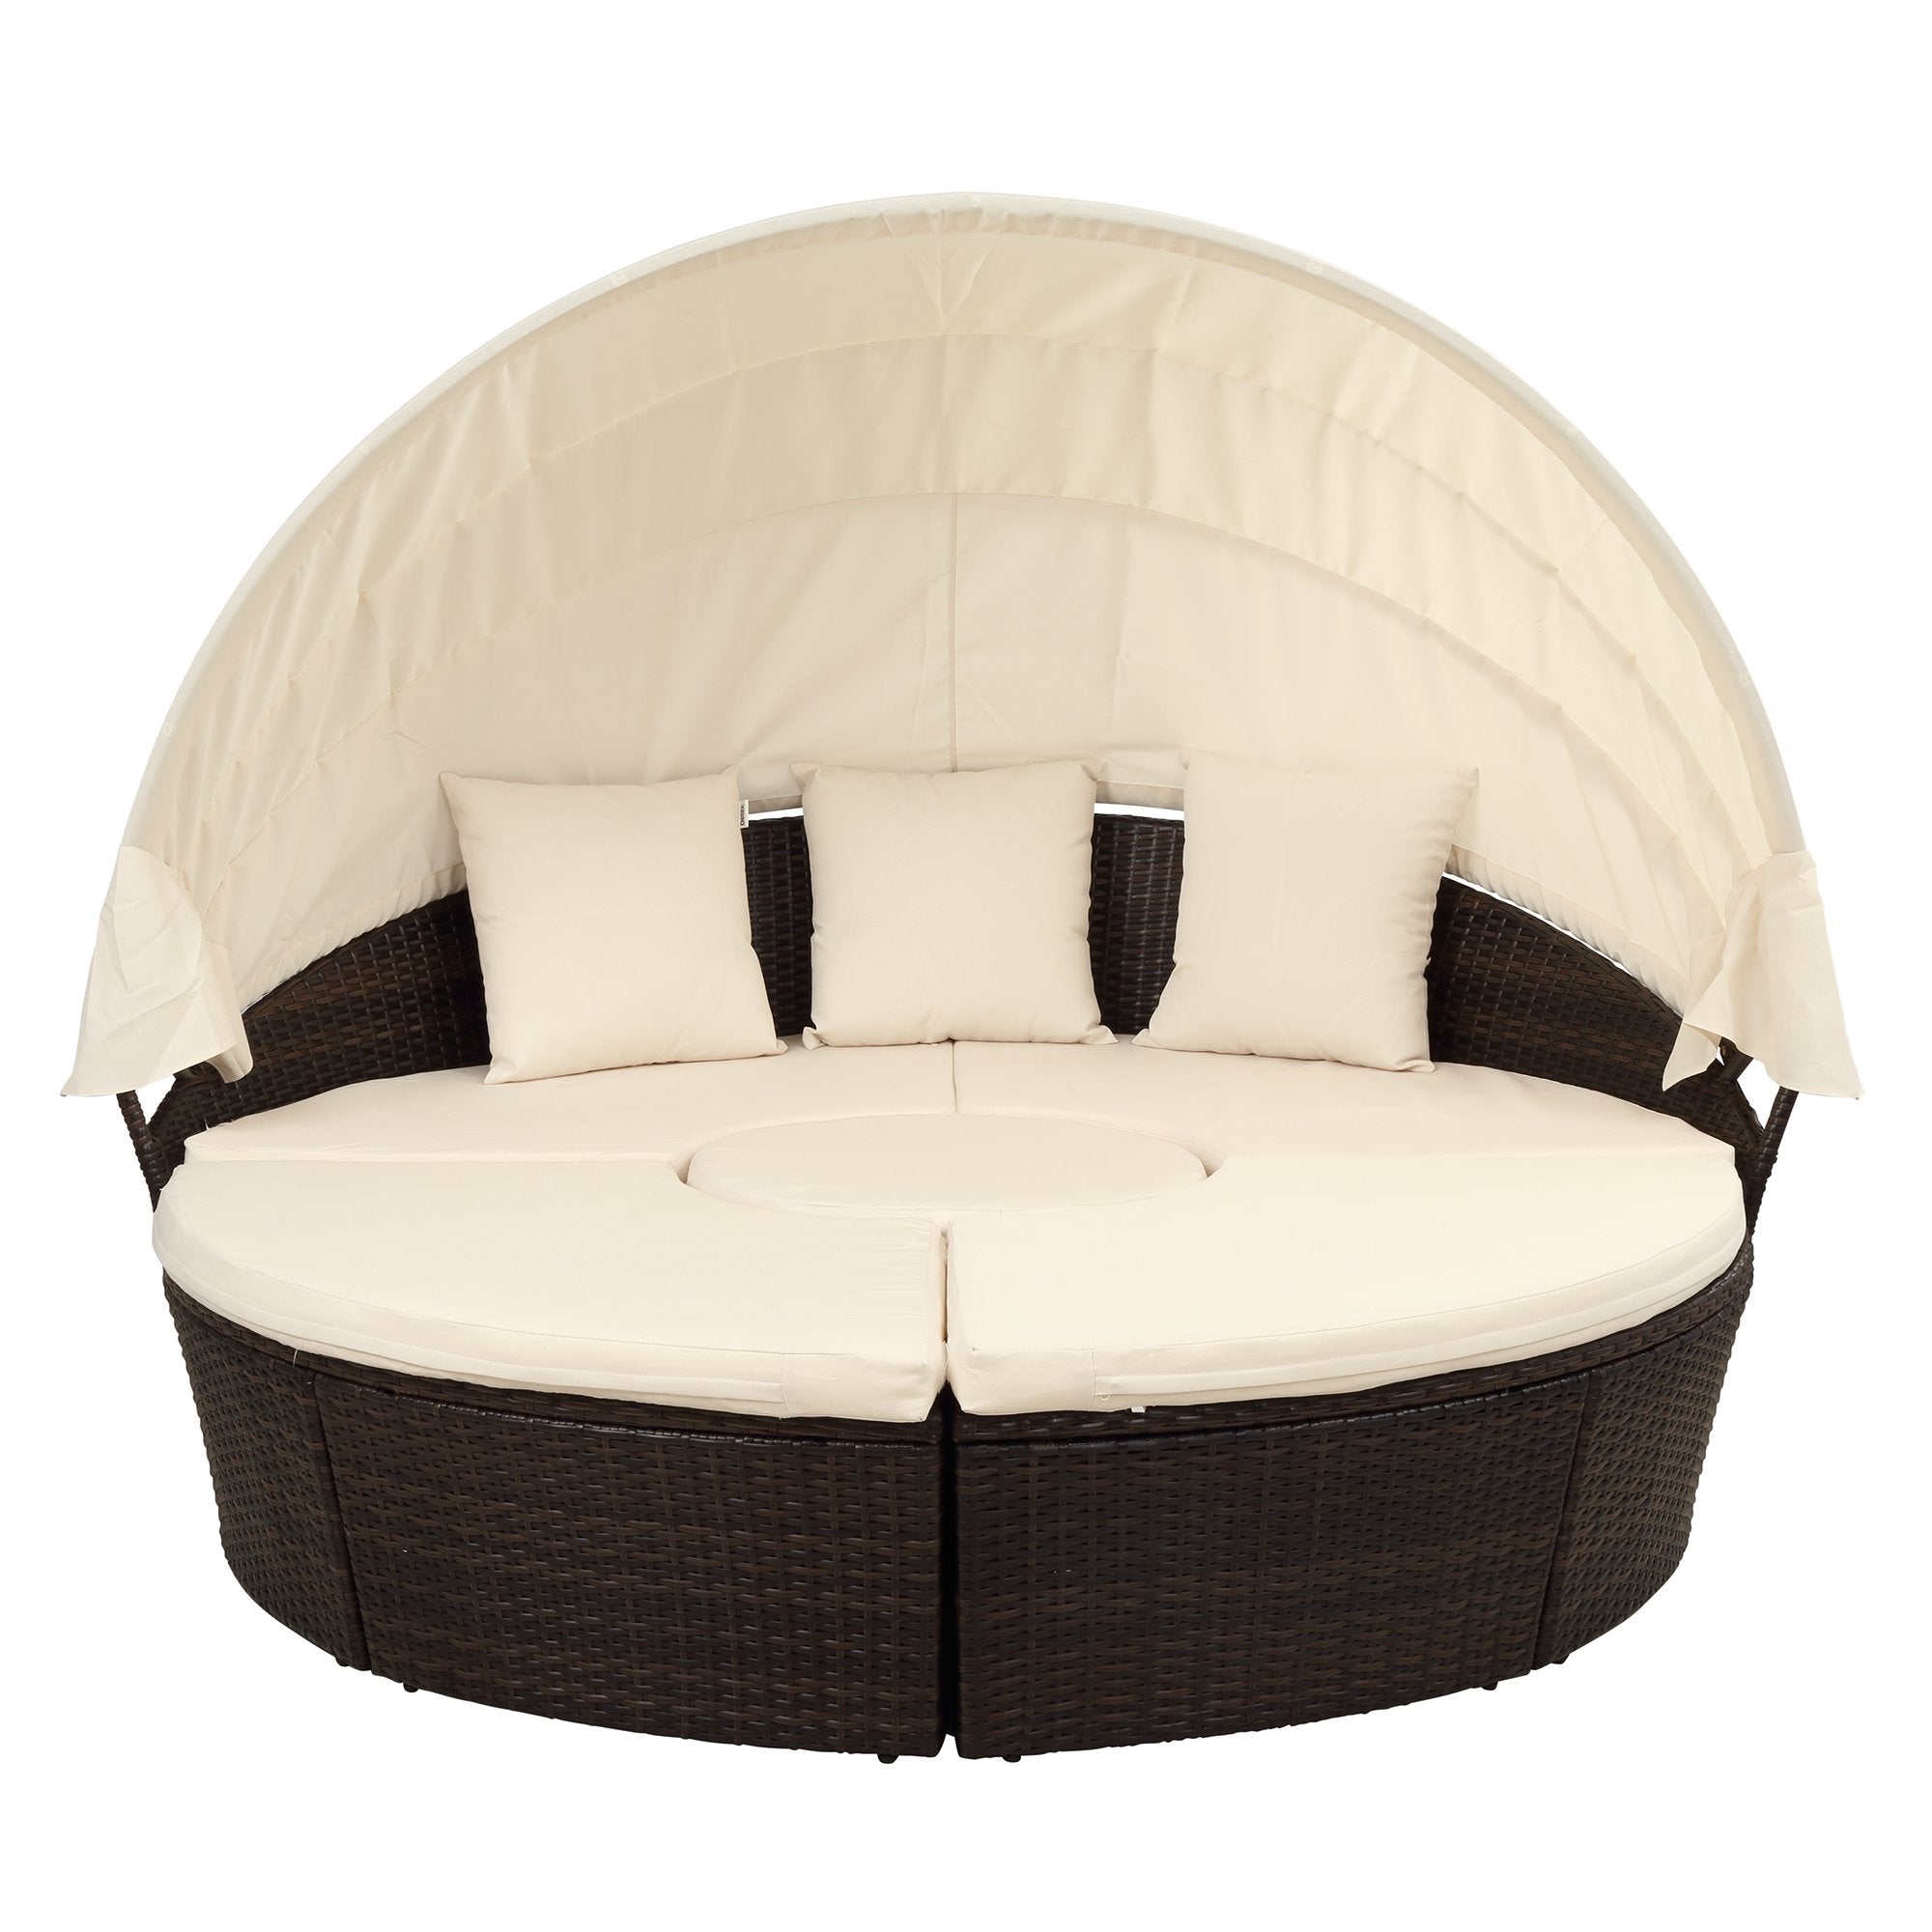 Patio Furniture Round Wicker Outdoor Daybed Sunbed with Retractable Canopy with Cushion